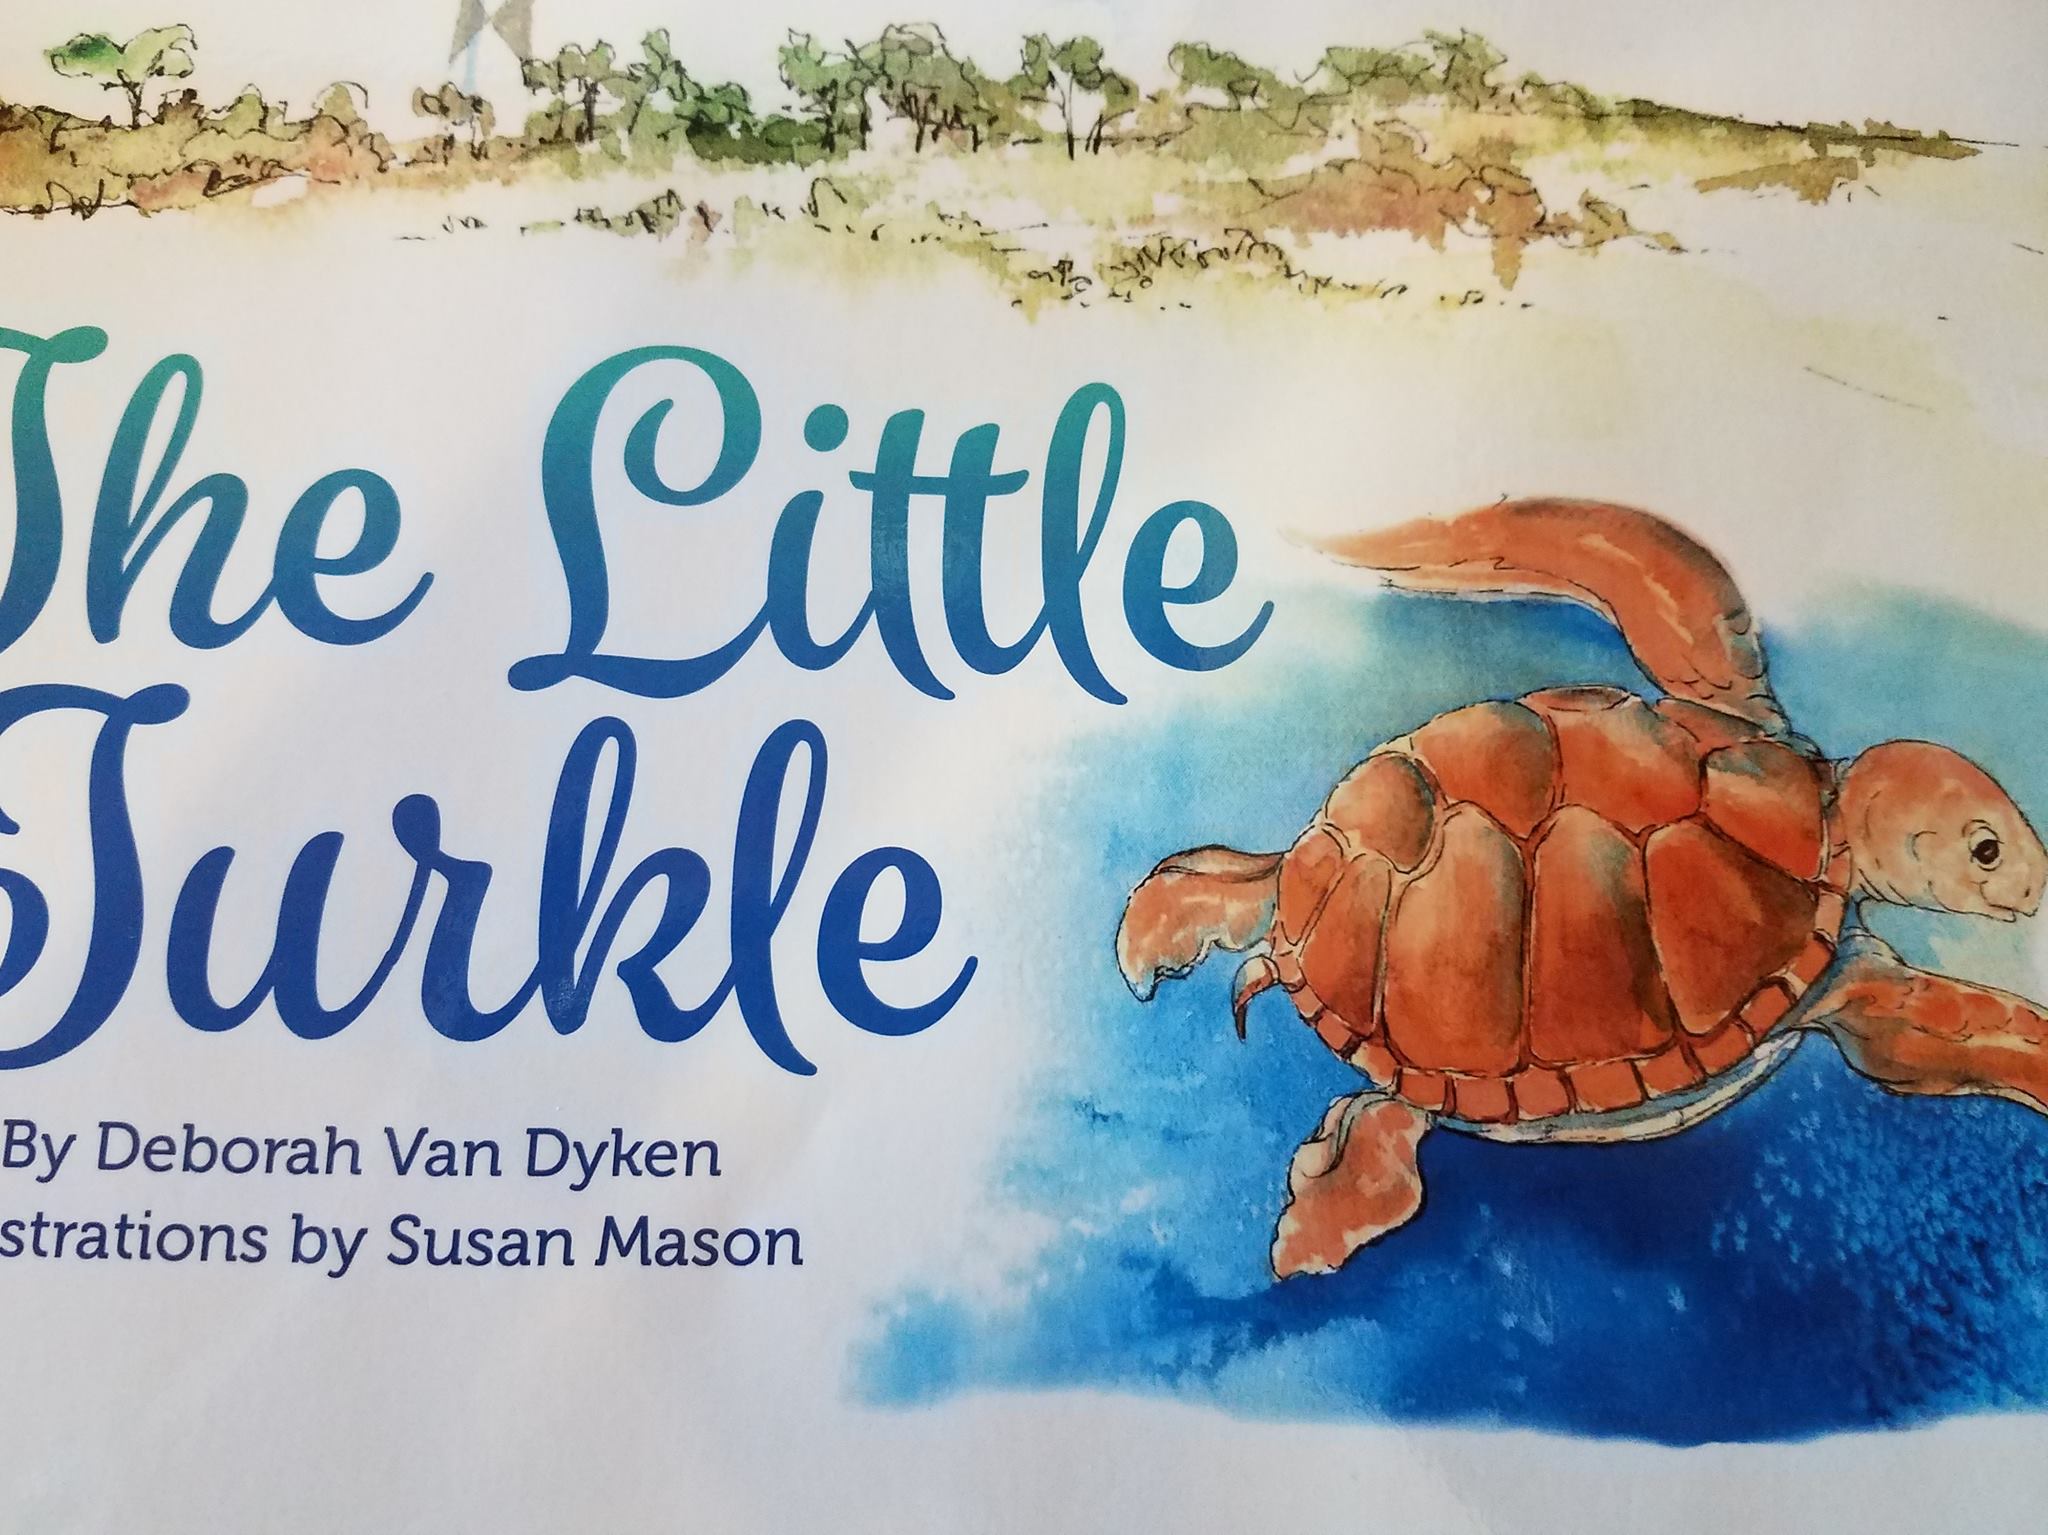 A Book About Sea Turtles (First Grade Book) - Wilbooks